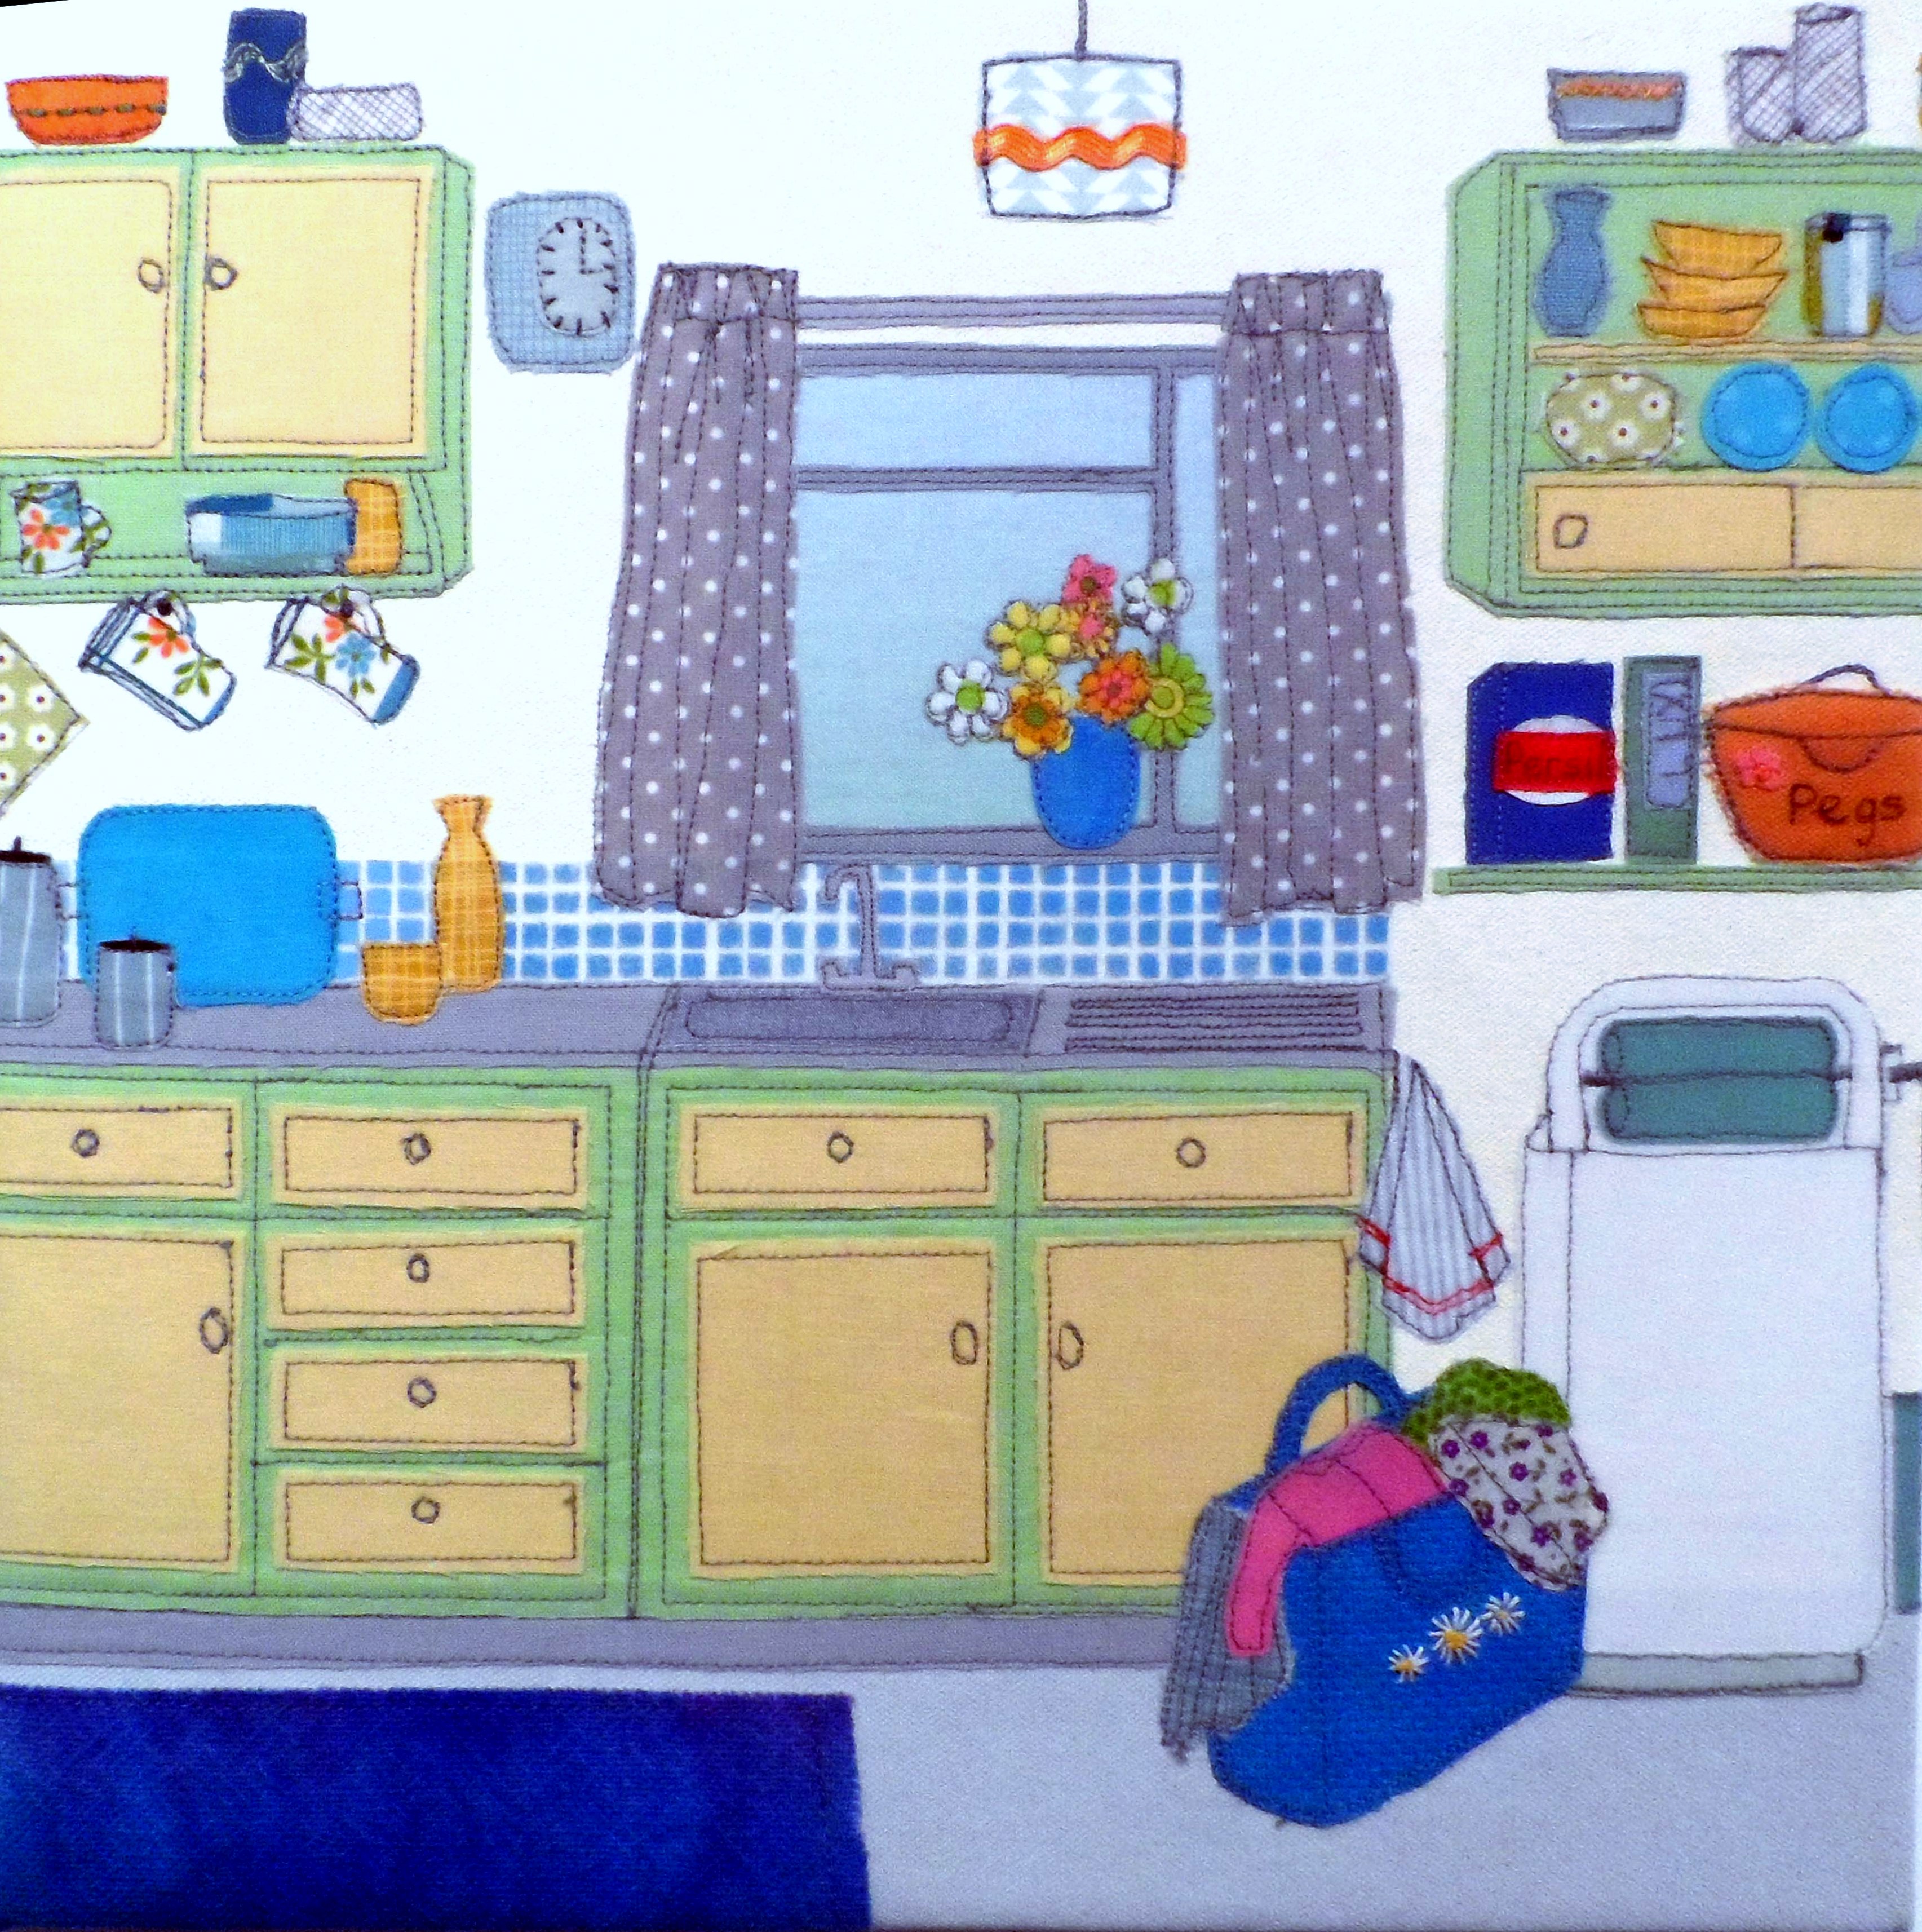 RETRO KITCHEN (i) by Linda Young, applique and stitch